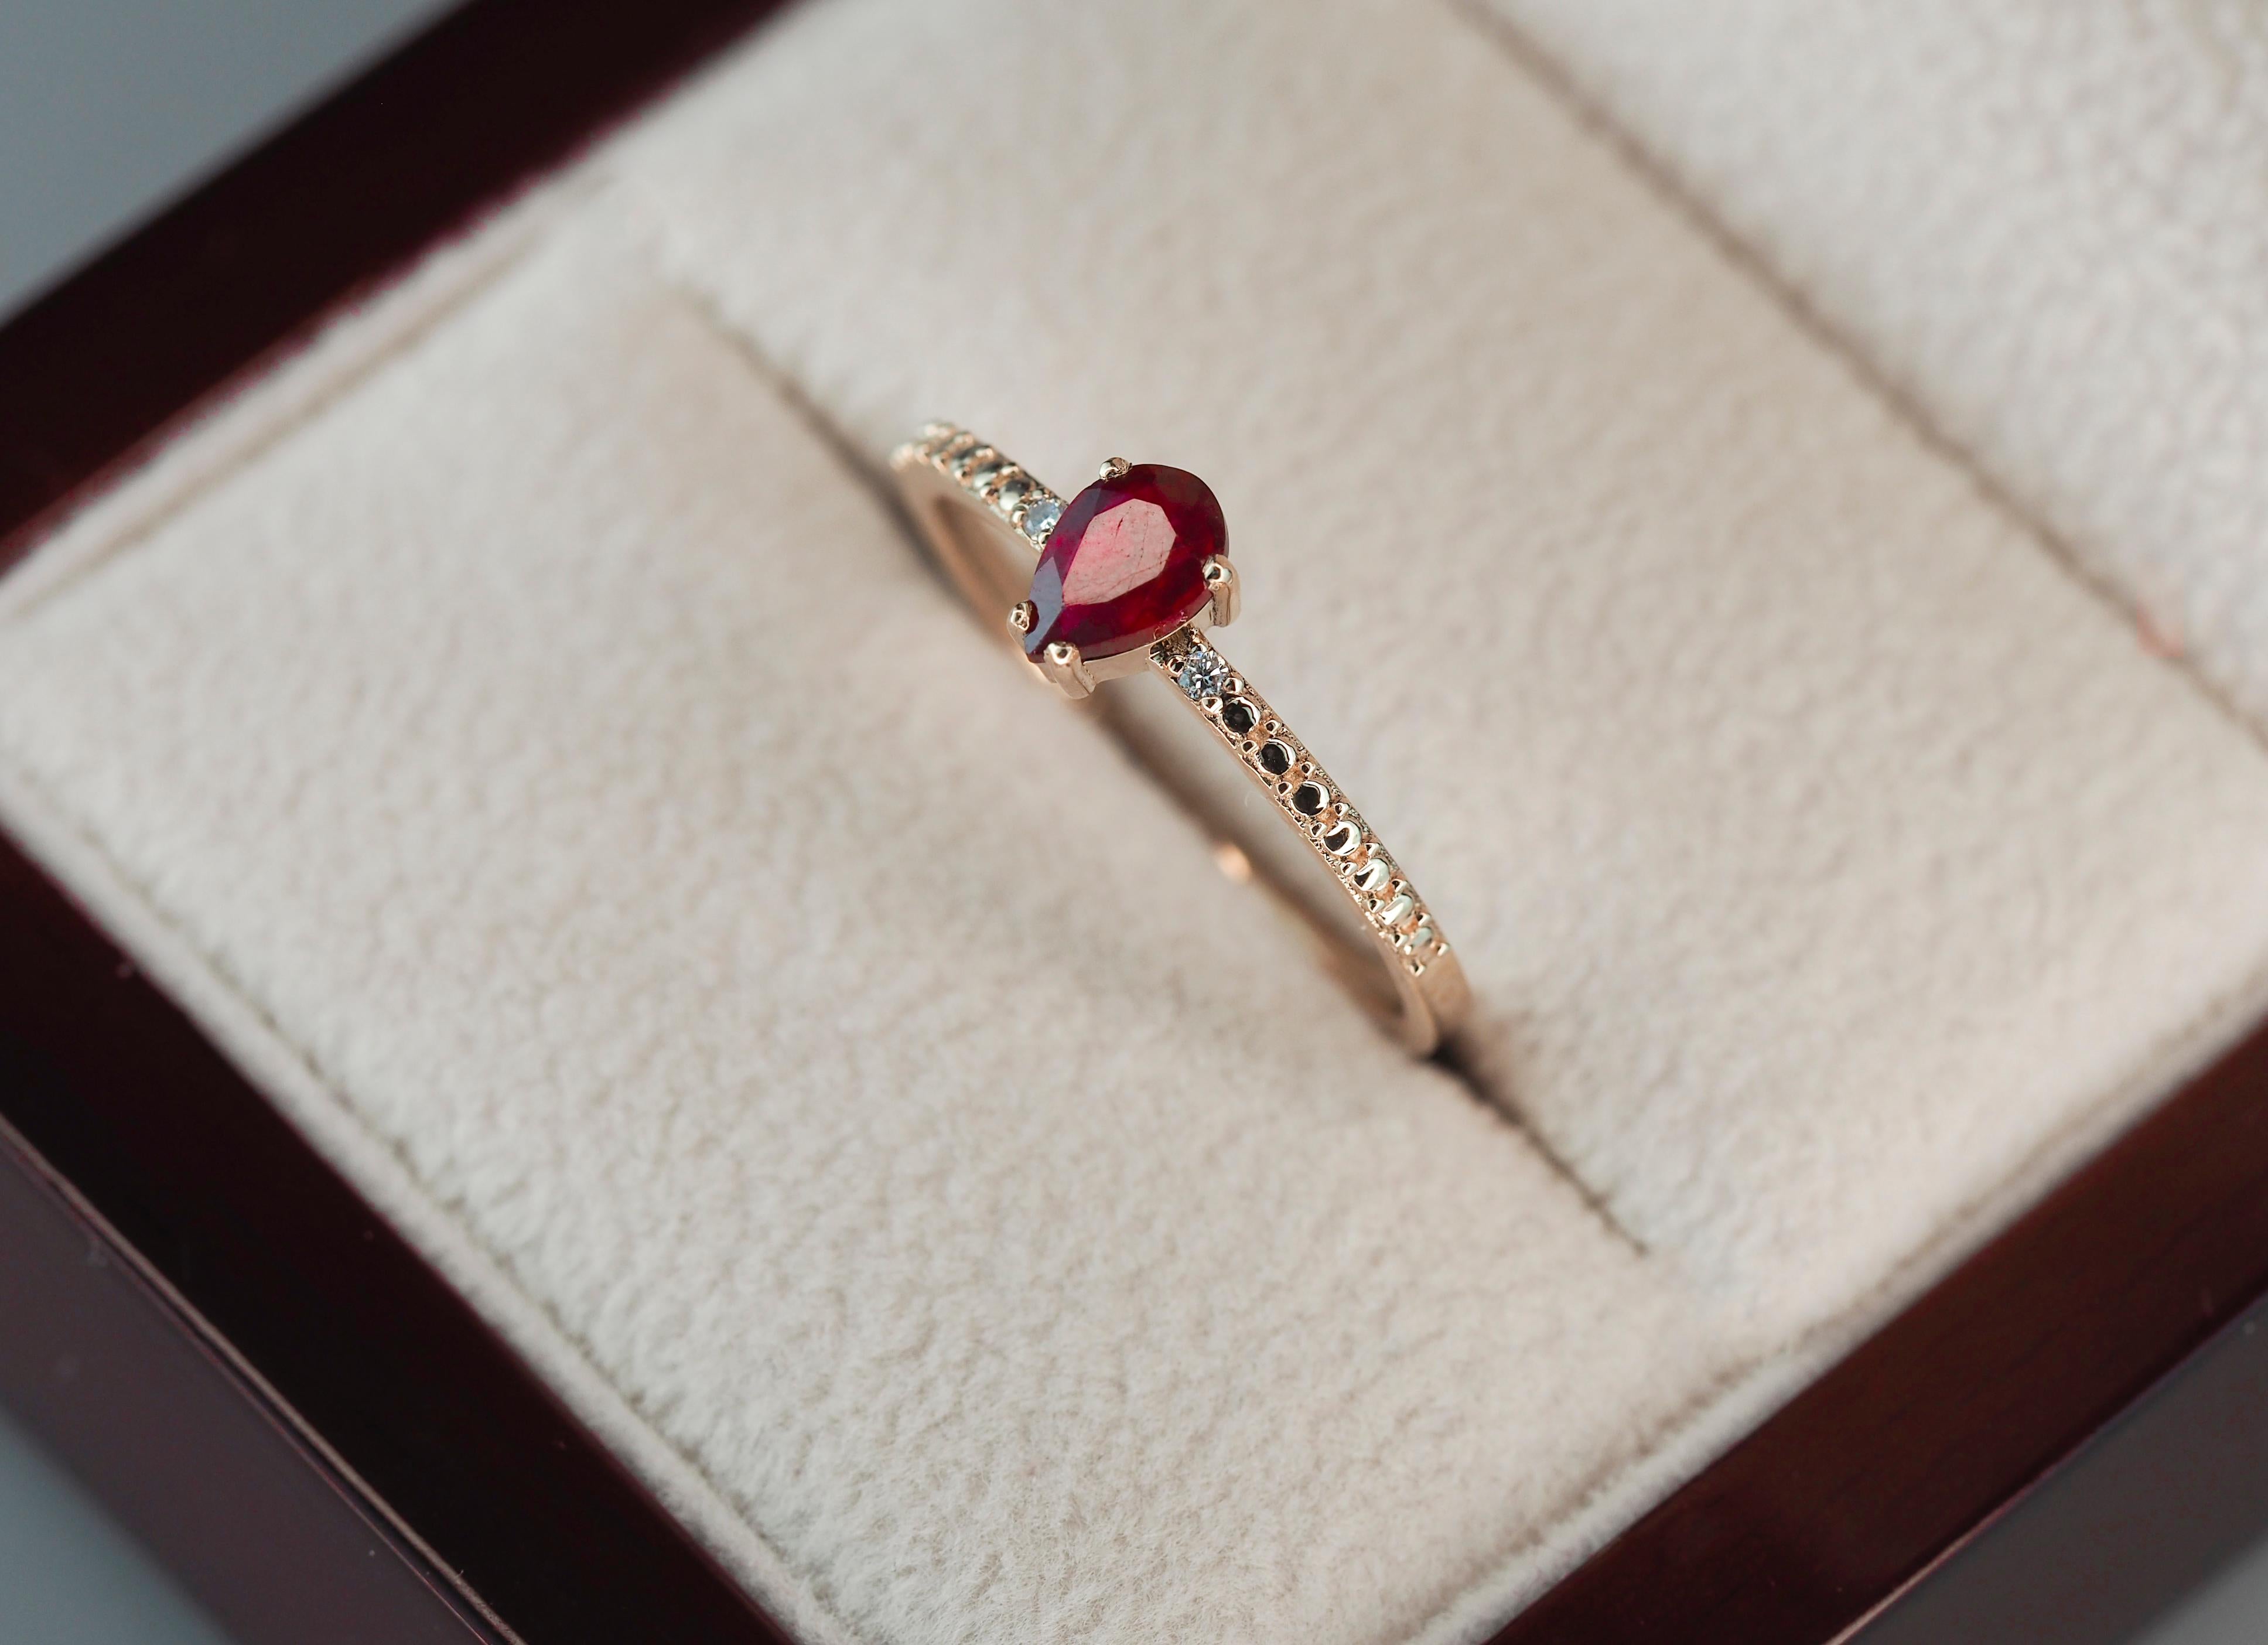 For Sale:  14 karat Gold Ring with Pear Ruby and Diamonds. Minimalist ruby ring 5